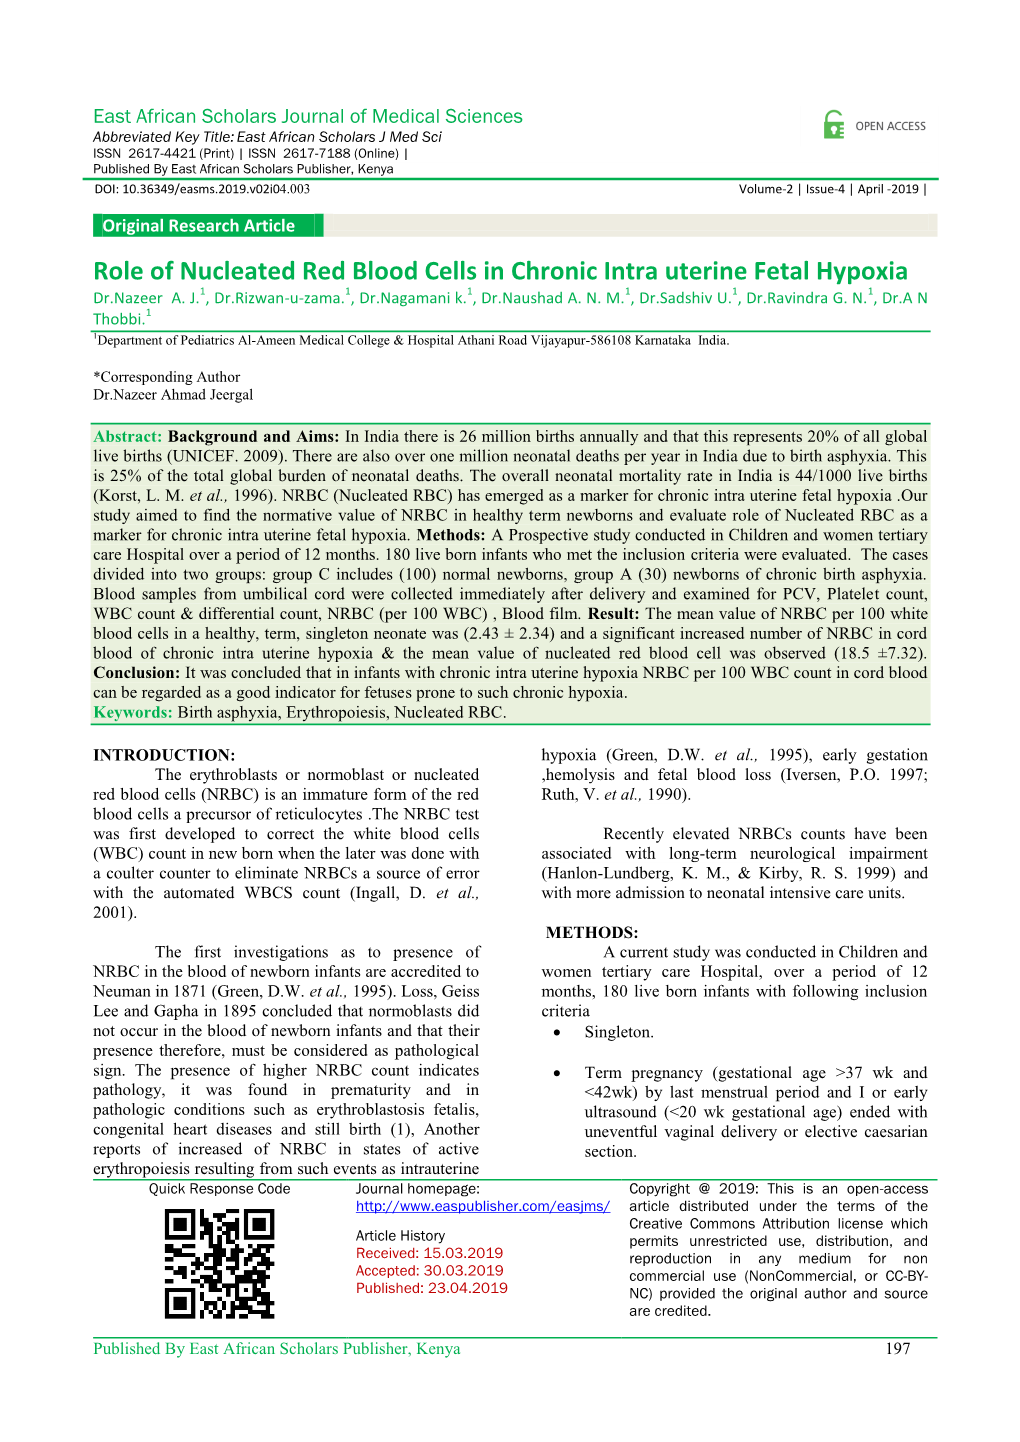 Role of Nucleated Red Blood Cells in Chronic Intra Uterine Fetal Hypoxia Dr.Nazeer A